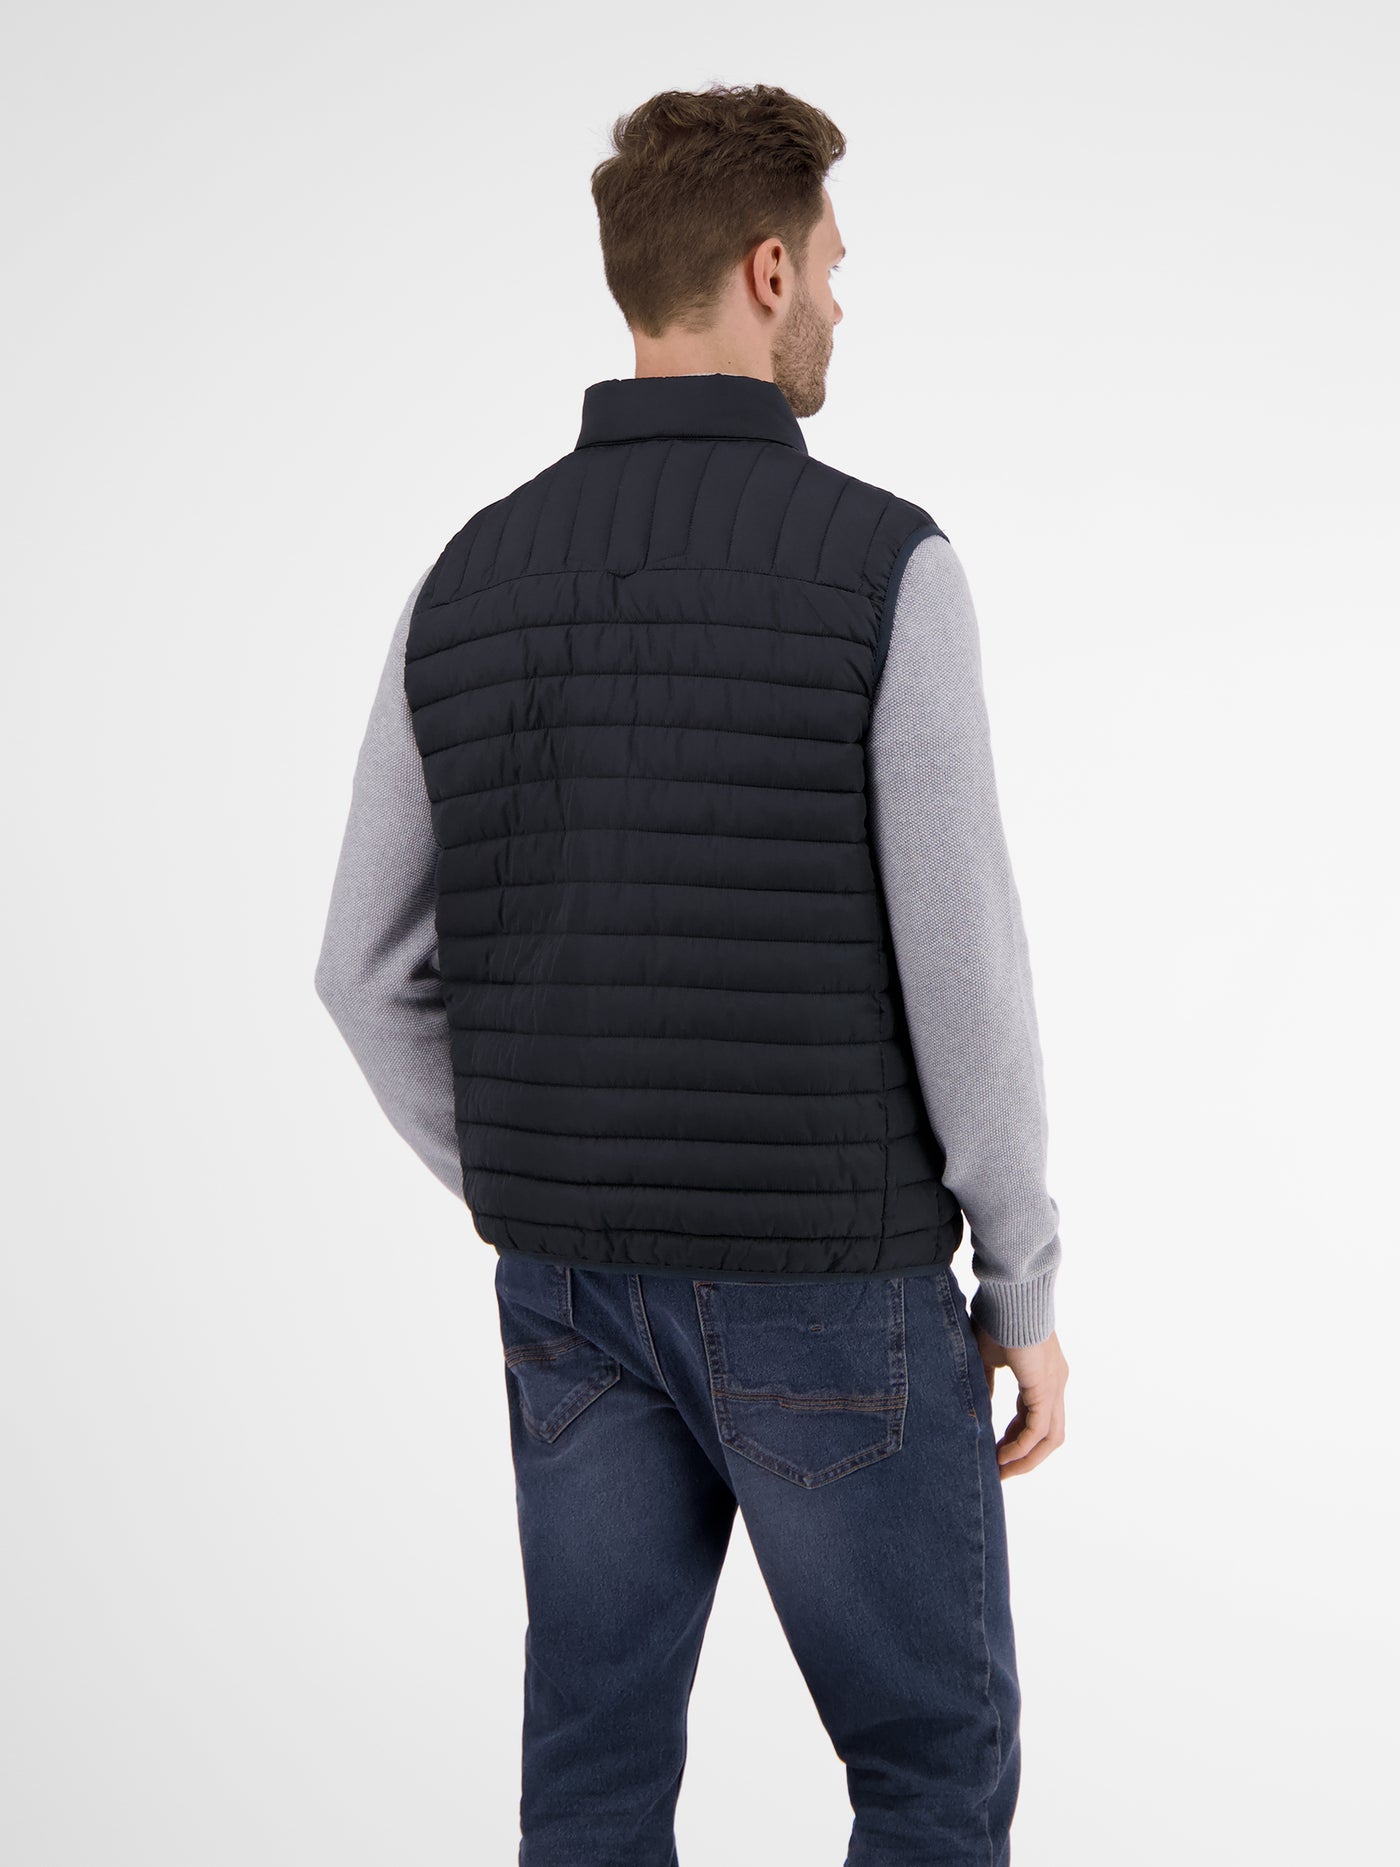 quilted vest